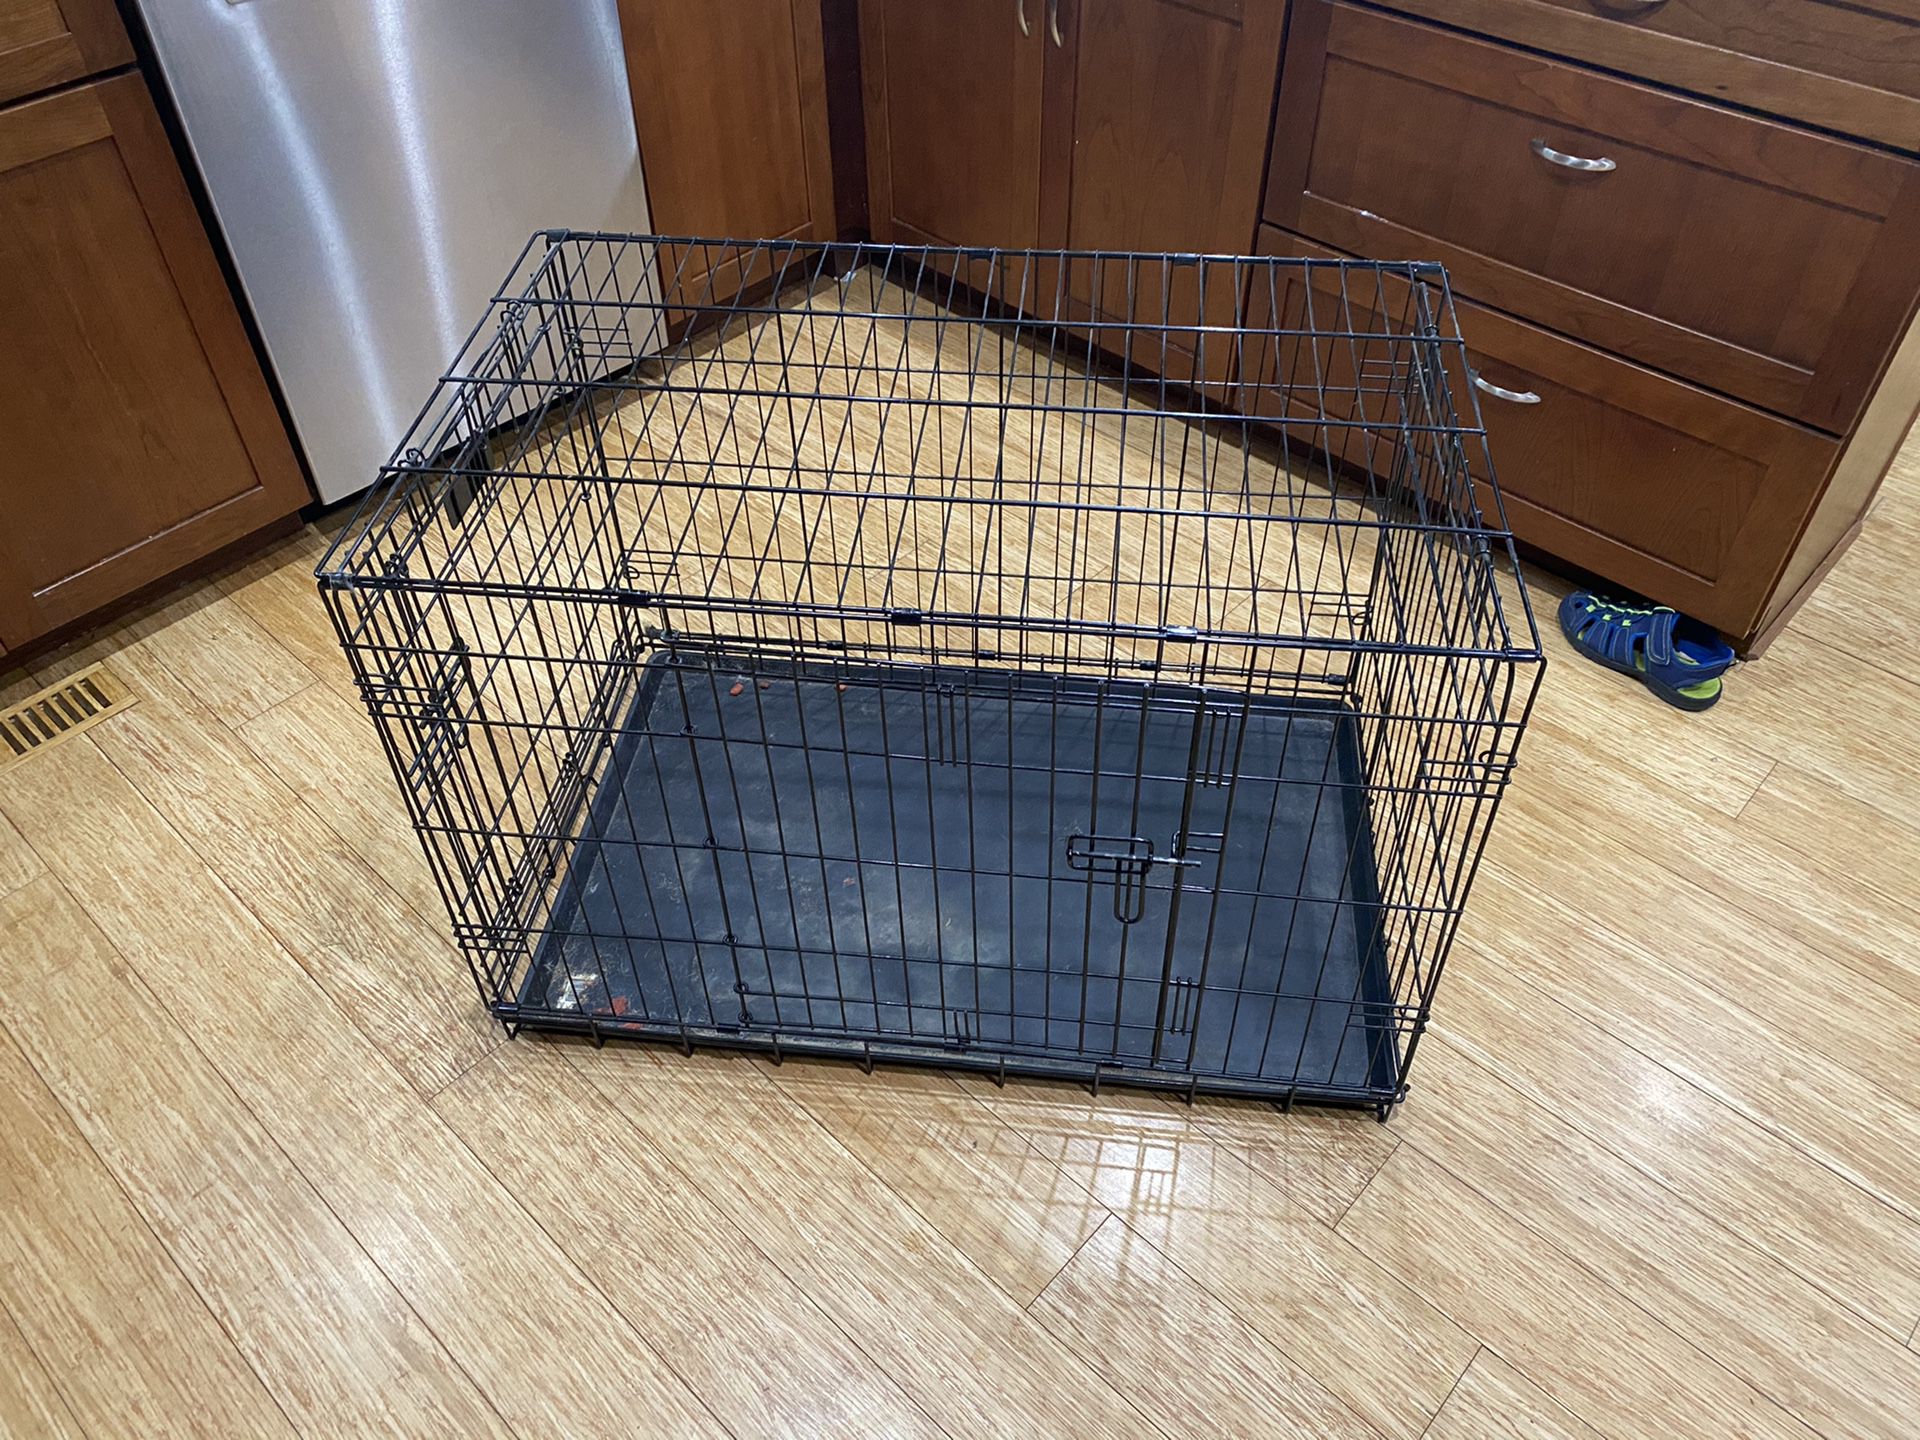 Mid size dog kennel